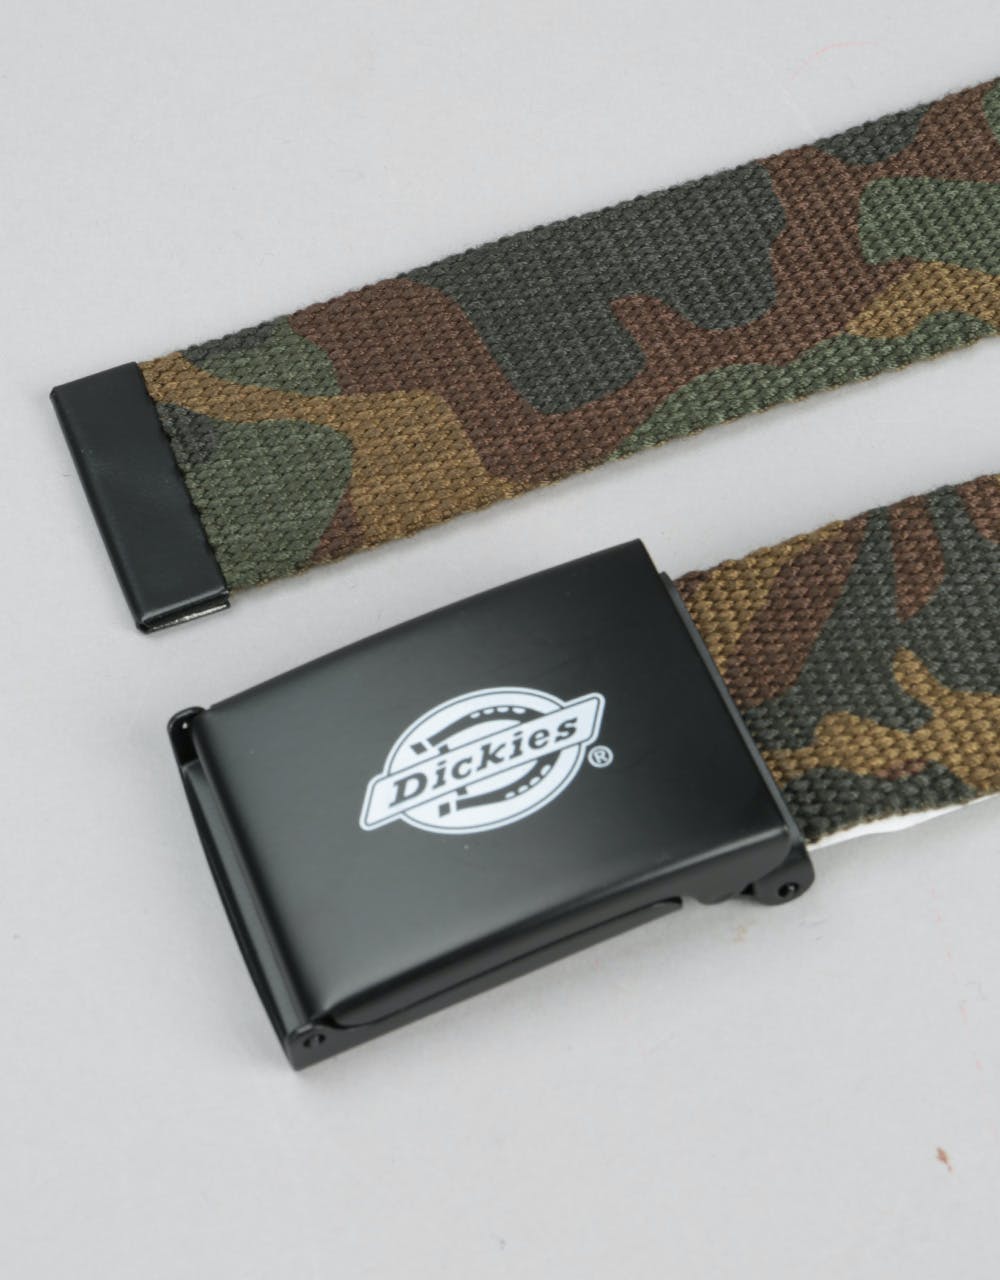 Dickies Orcutt Web Belt - Camouflage